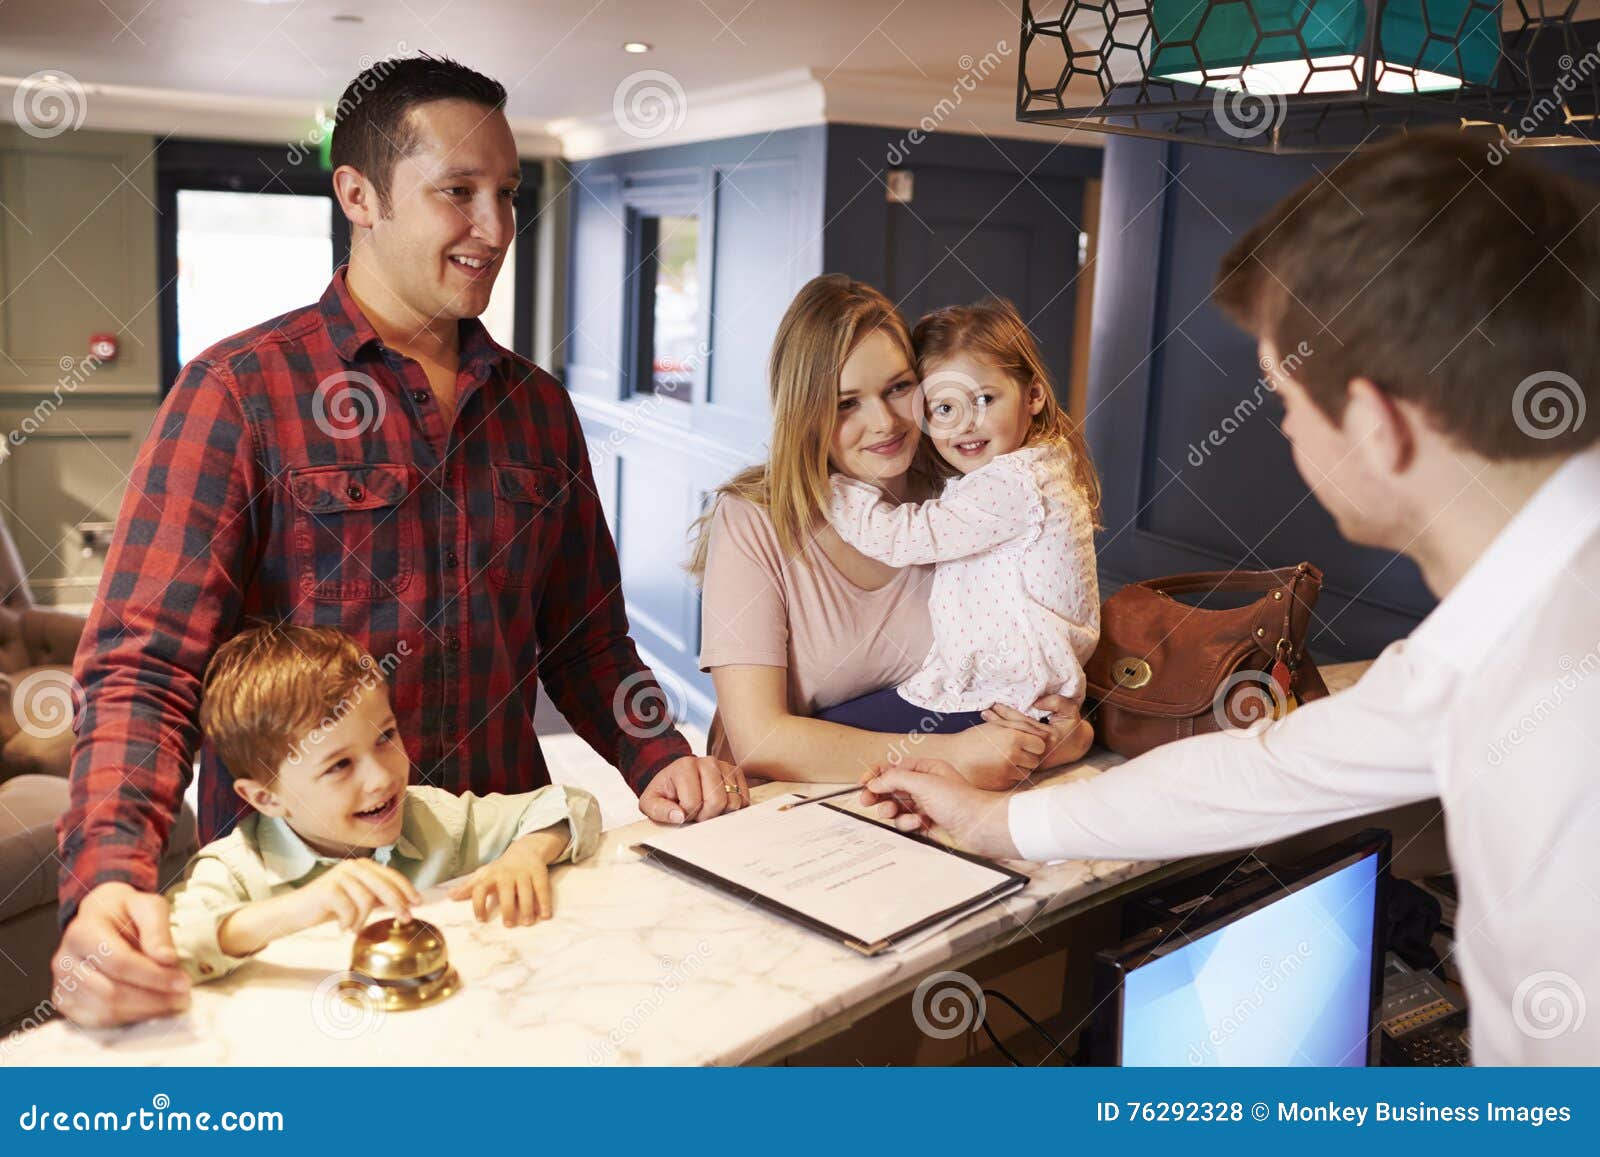 family checking in at hotel reception desk